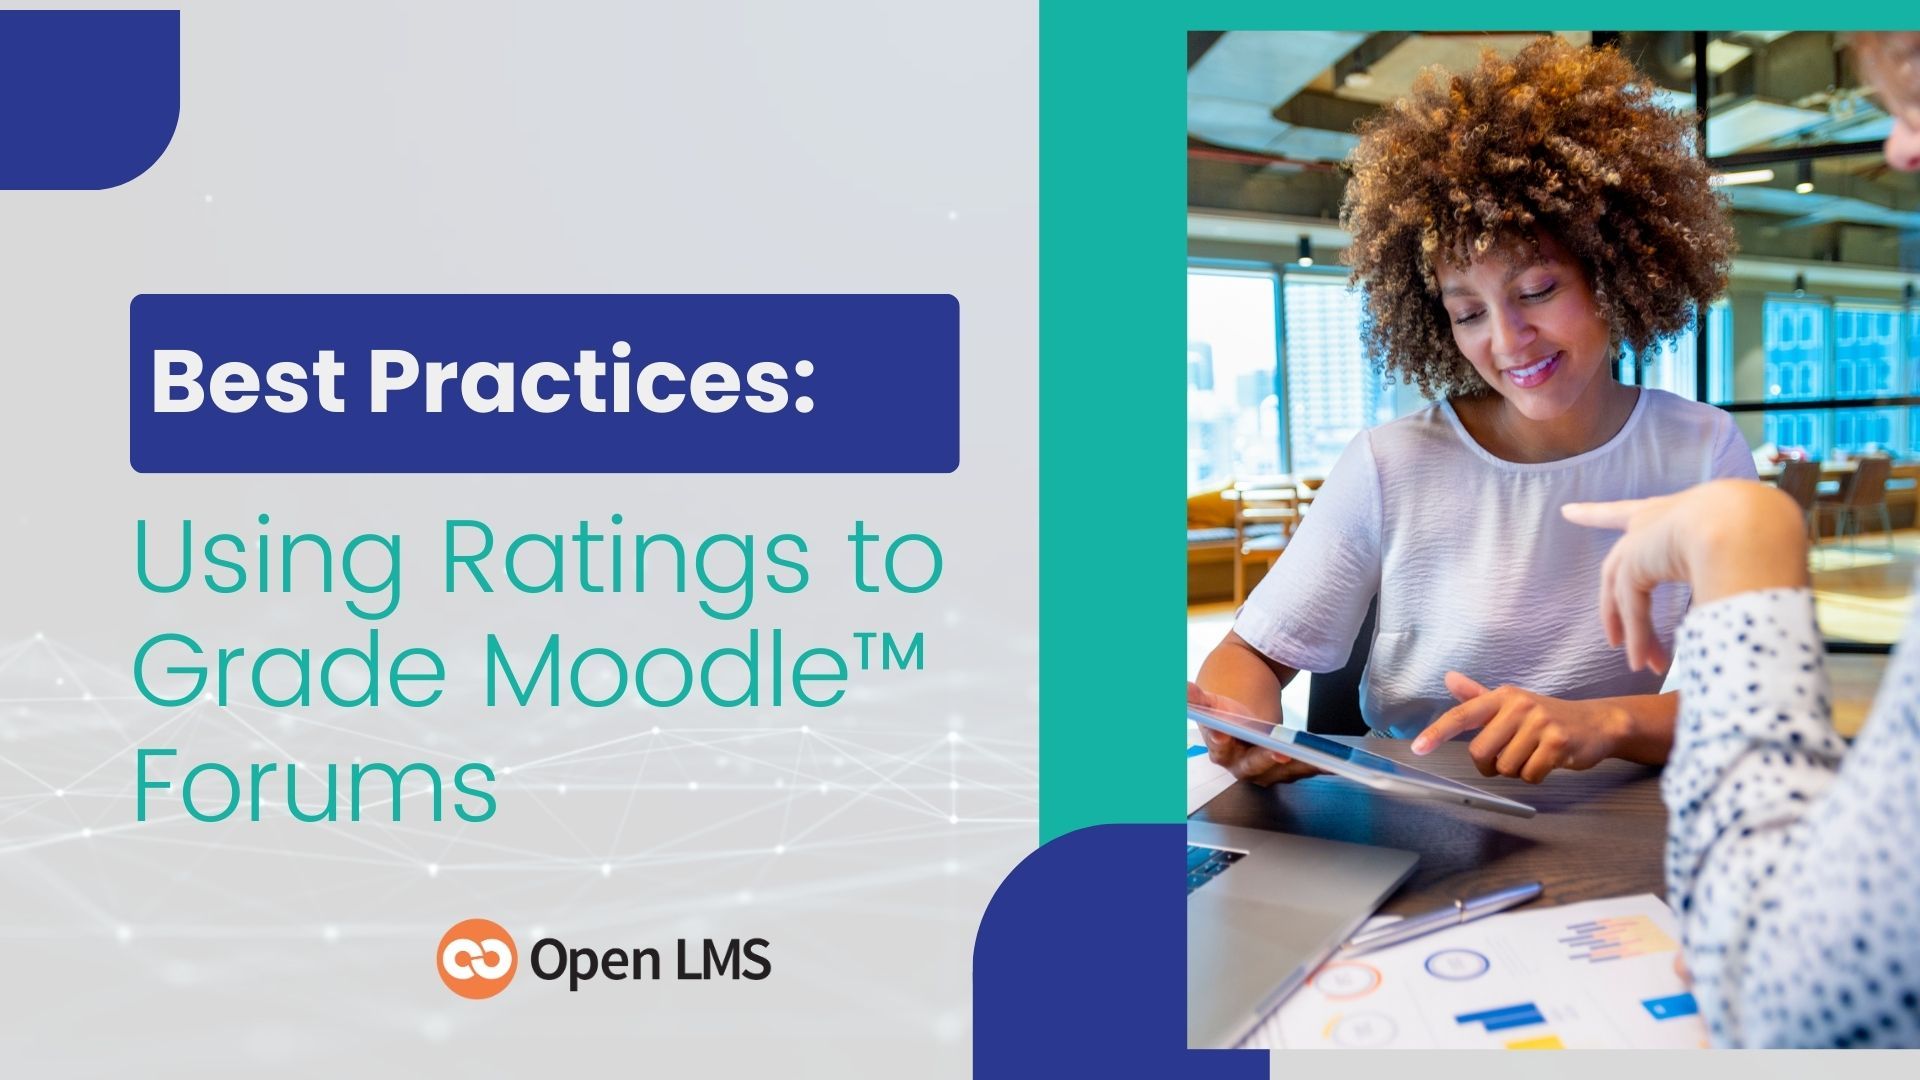 Best practices: Using ratings to grade Moodle™ forums